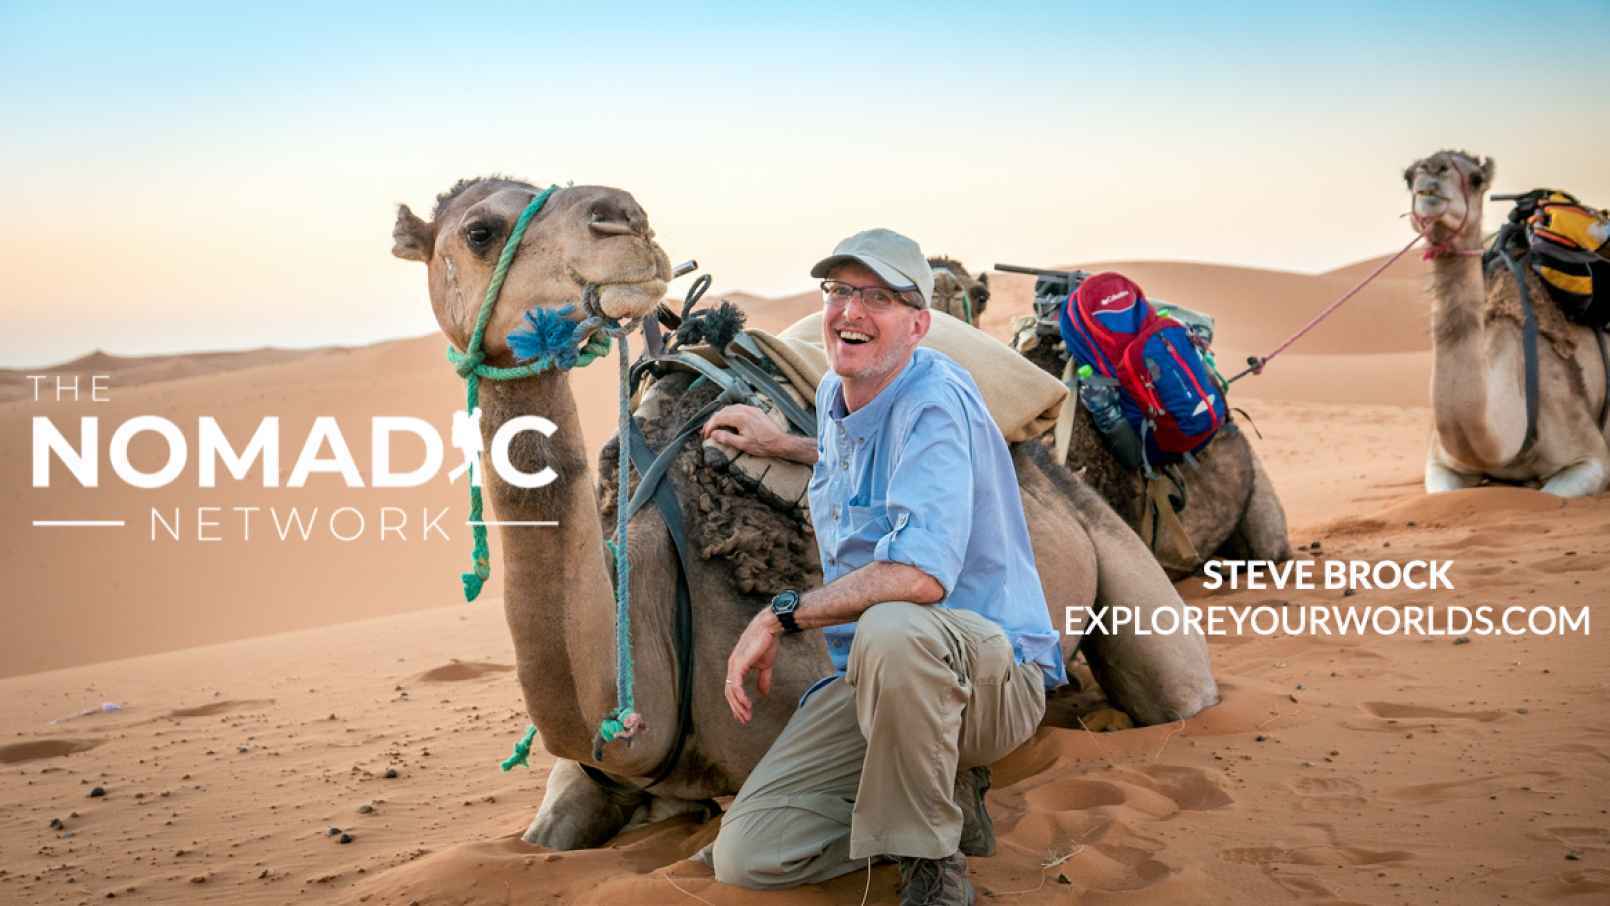 Steve Brock traveling with camels in the desert